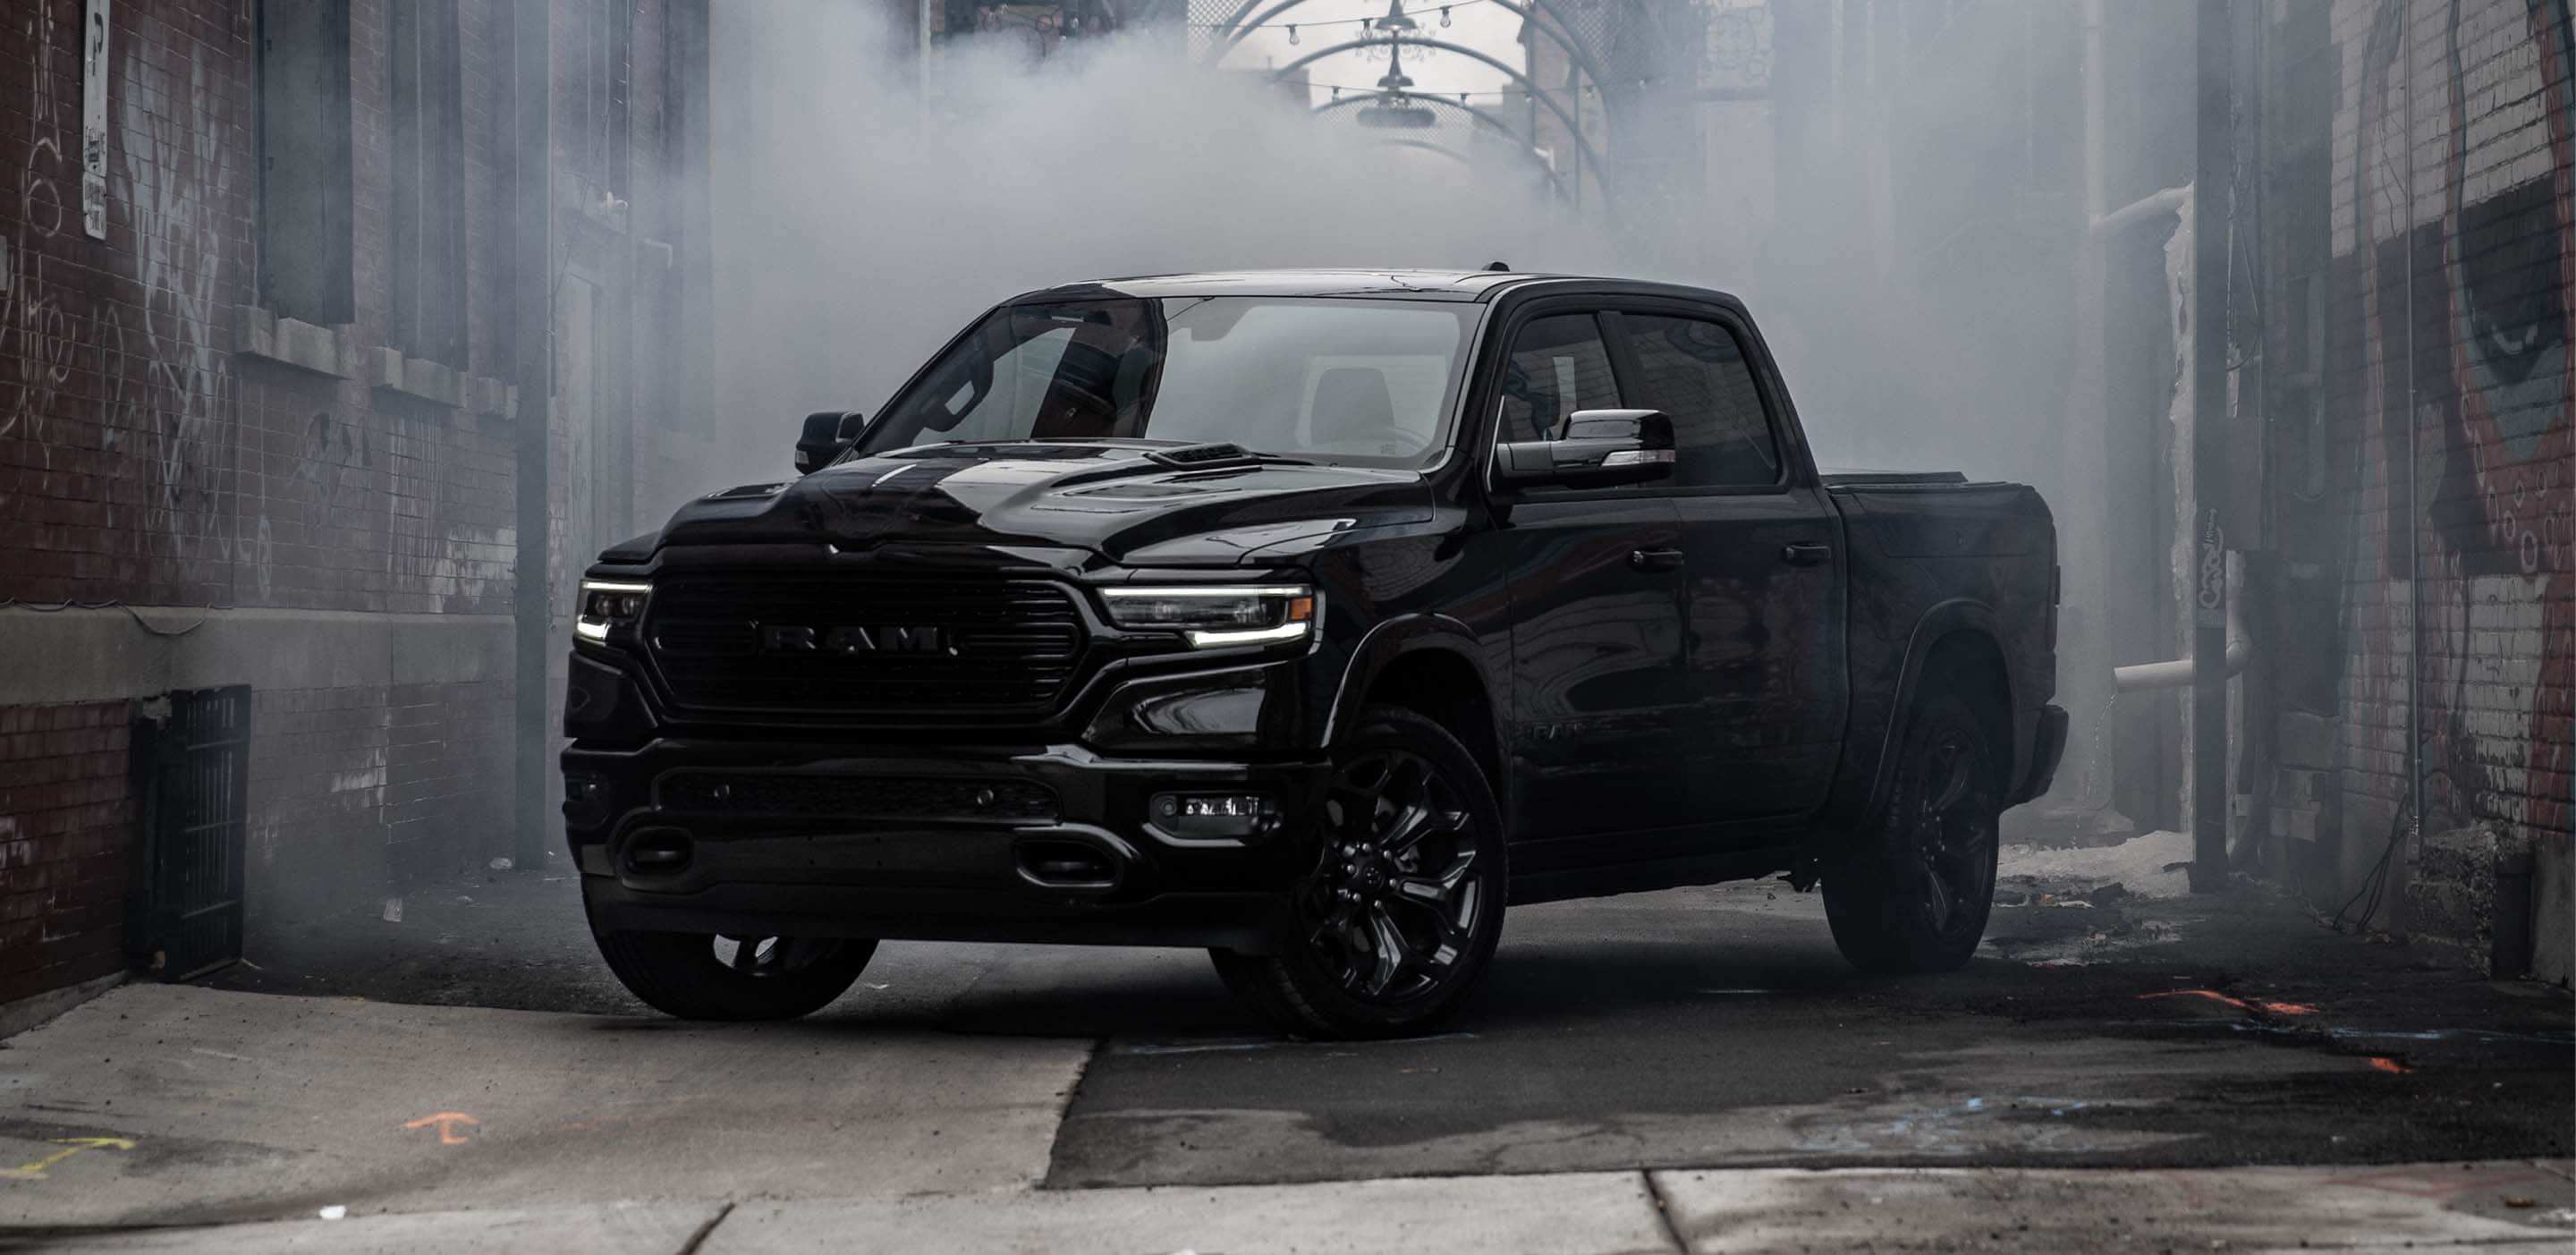 Display The 2023 Ram 1500 parked in a graffitied alleyway, surrounded by fog.